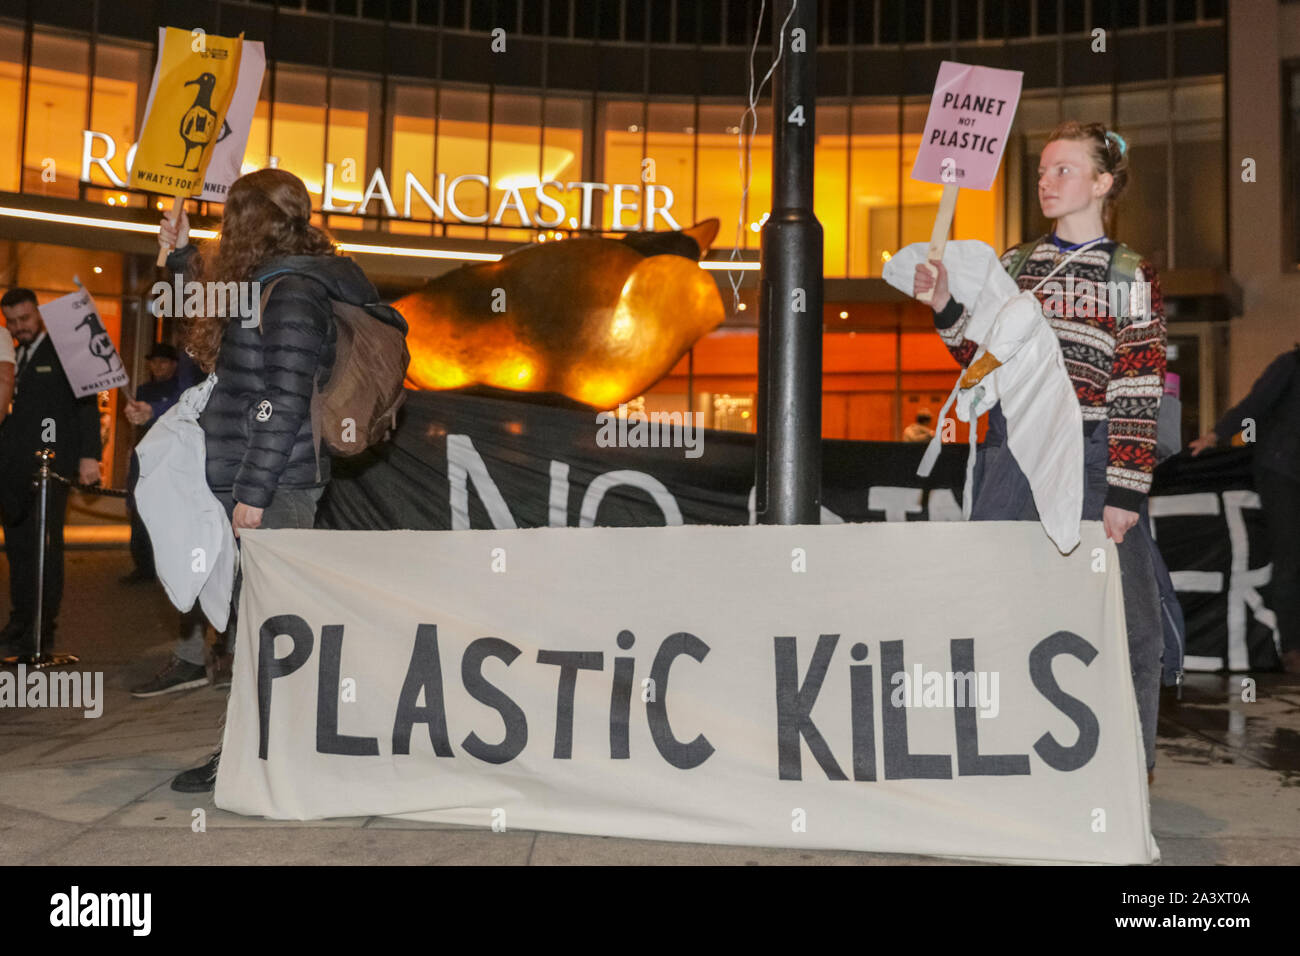 London, UK, 10 Oct 2019. Extinction Rebellion protesters from London XR groups, including the XR drummers, protest outside the British Plastics Federation (BPF) annual dinner at the Royal Lancaster Hotel this evening. The event is an annual industry and networking event for the plastics industry. Many of the attendees interact and chat to protesters on this occasion. Credit: Imageplotter/Alamy Live News Stock Photo